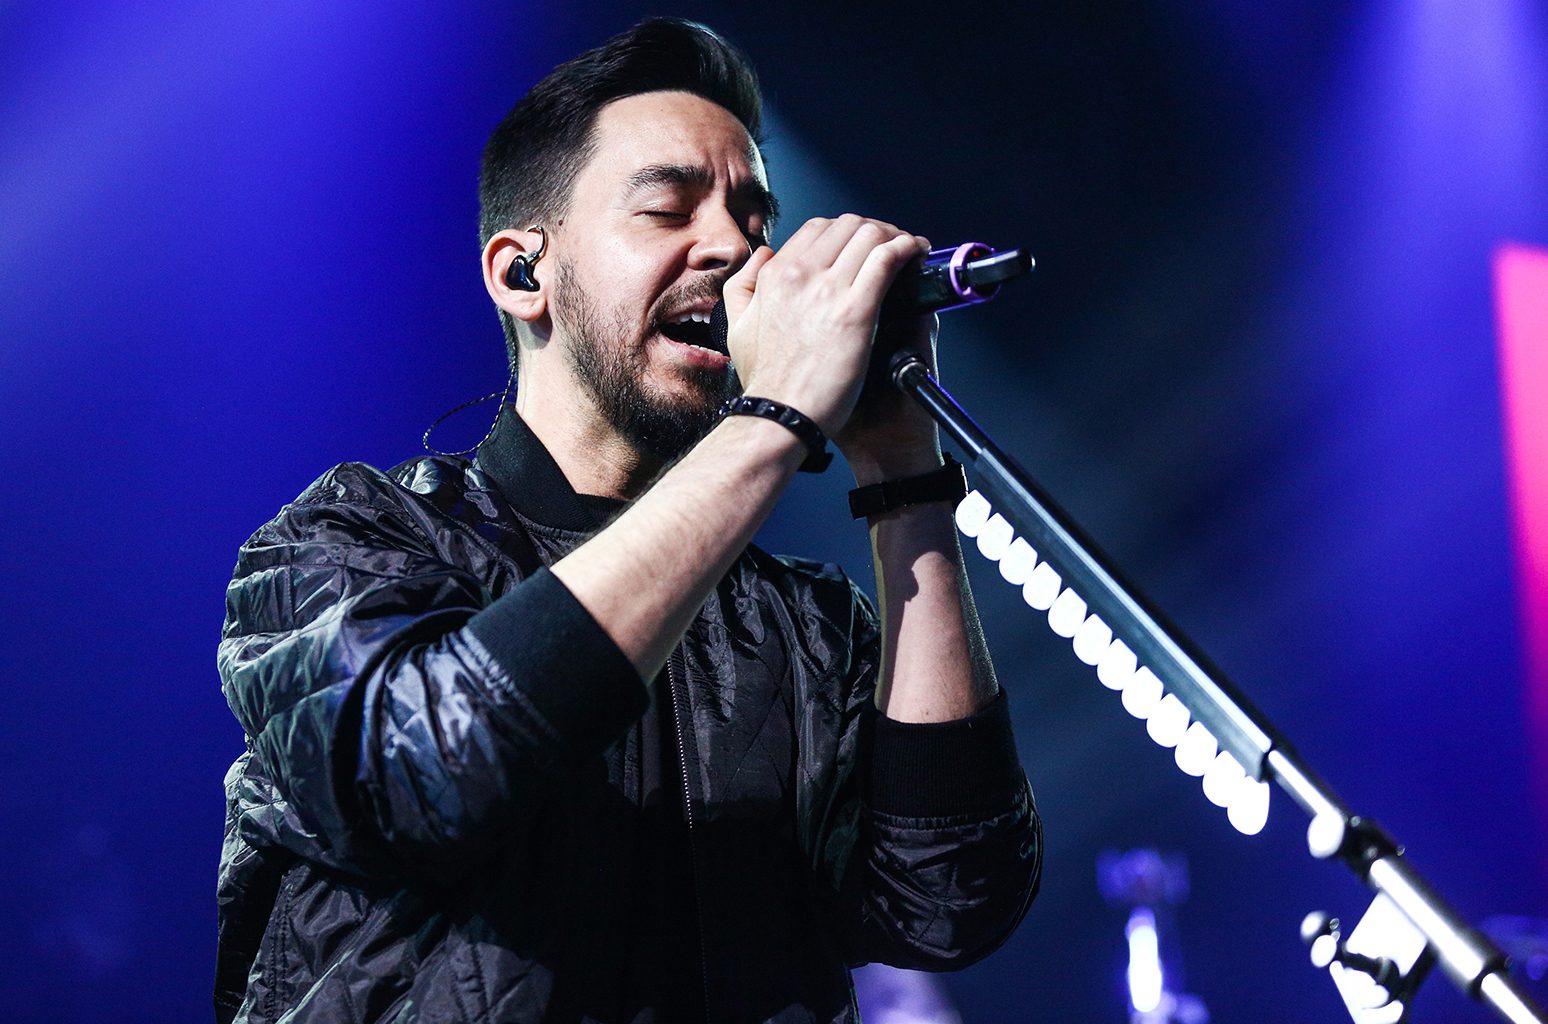 Running From My Shadow, le nouveau titre de Mike Shinoda